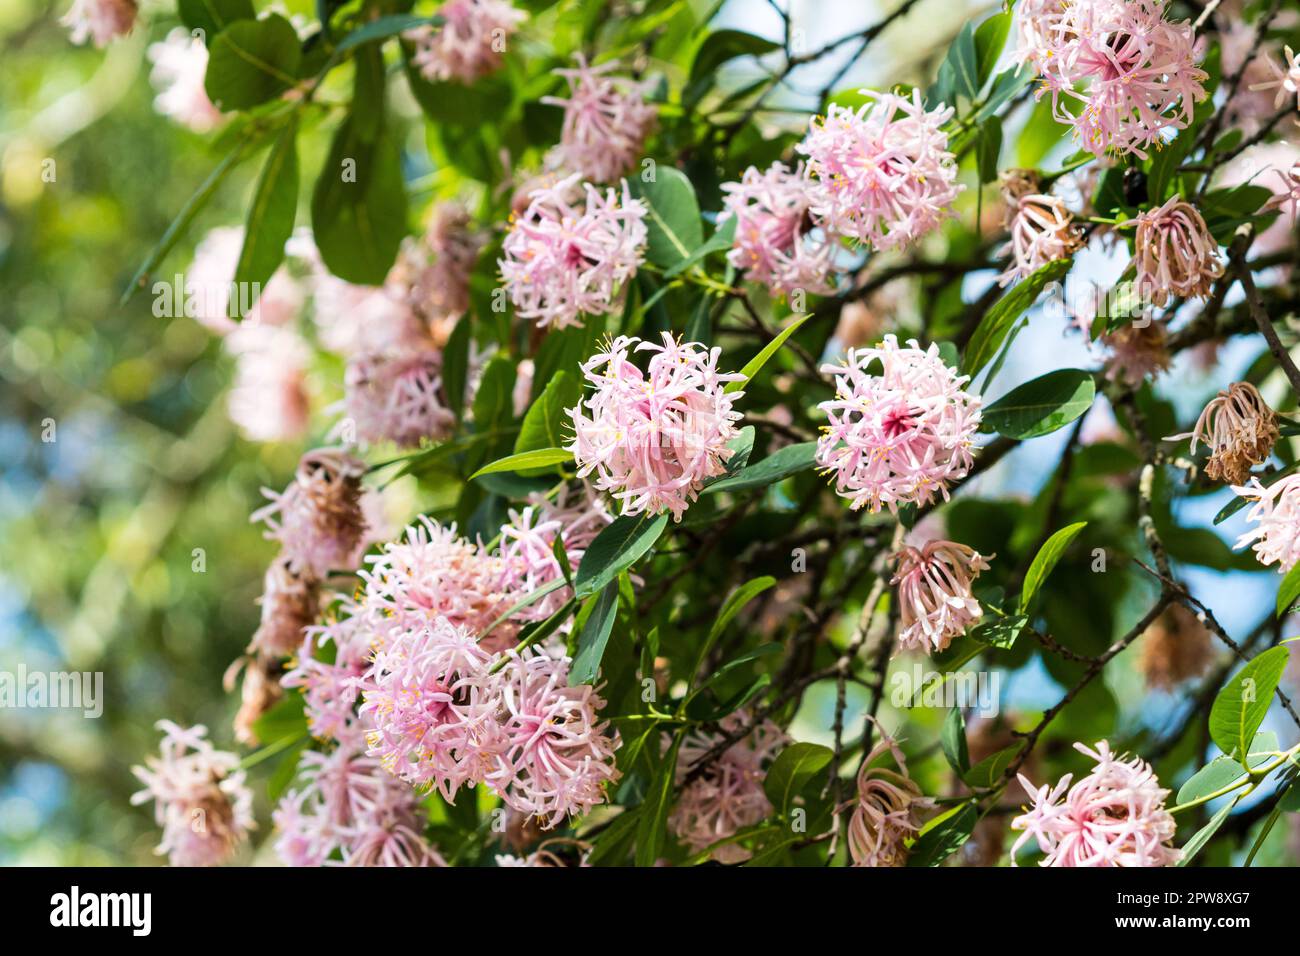 Dais cotinifolia pink flowers closeup blooming on a Pompon tree which is indigenous or native to South Africa Stock Photo